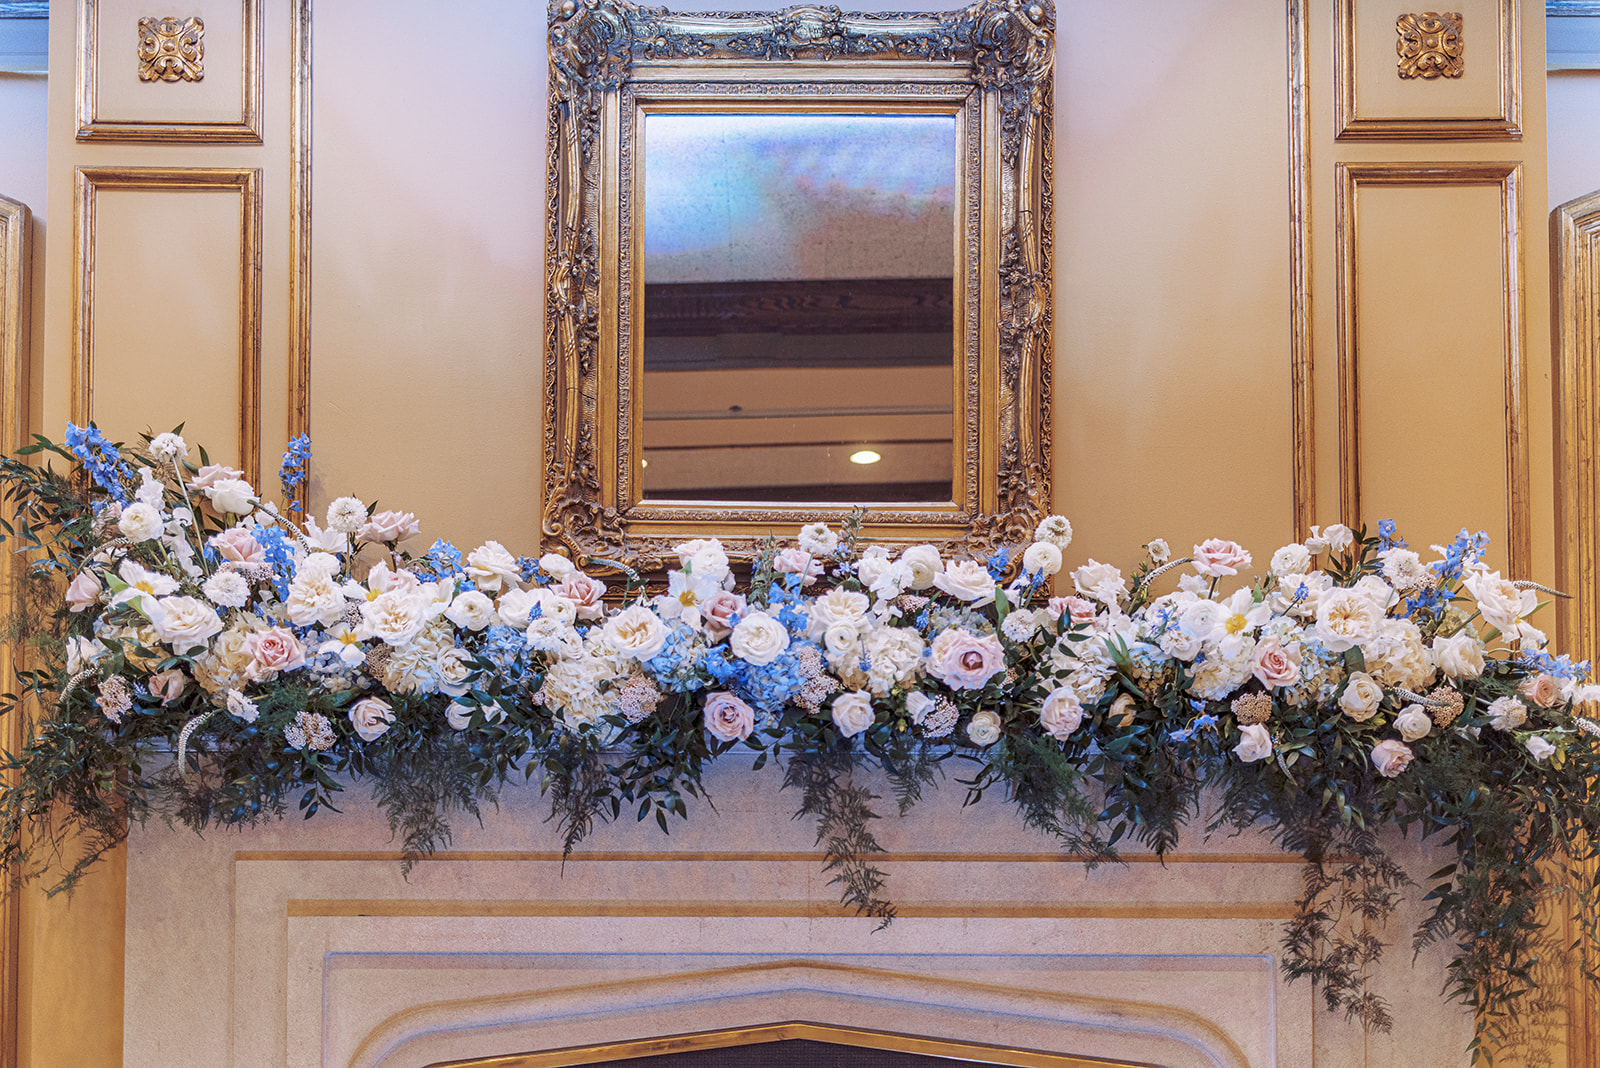 Pastel wedding at the Kenwood Country Club